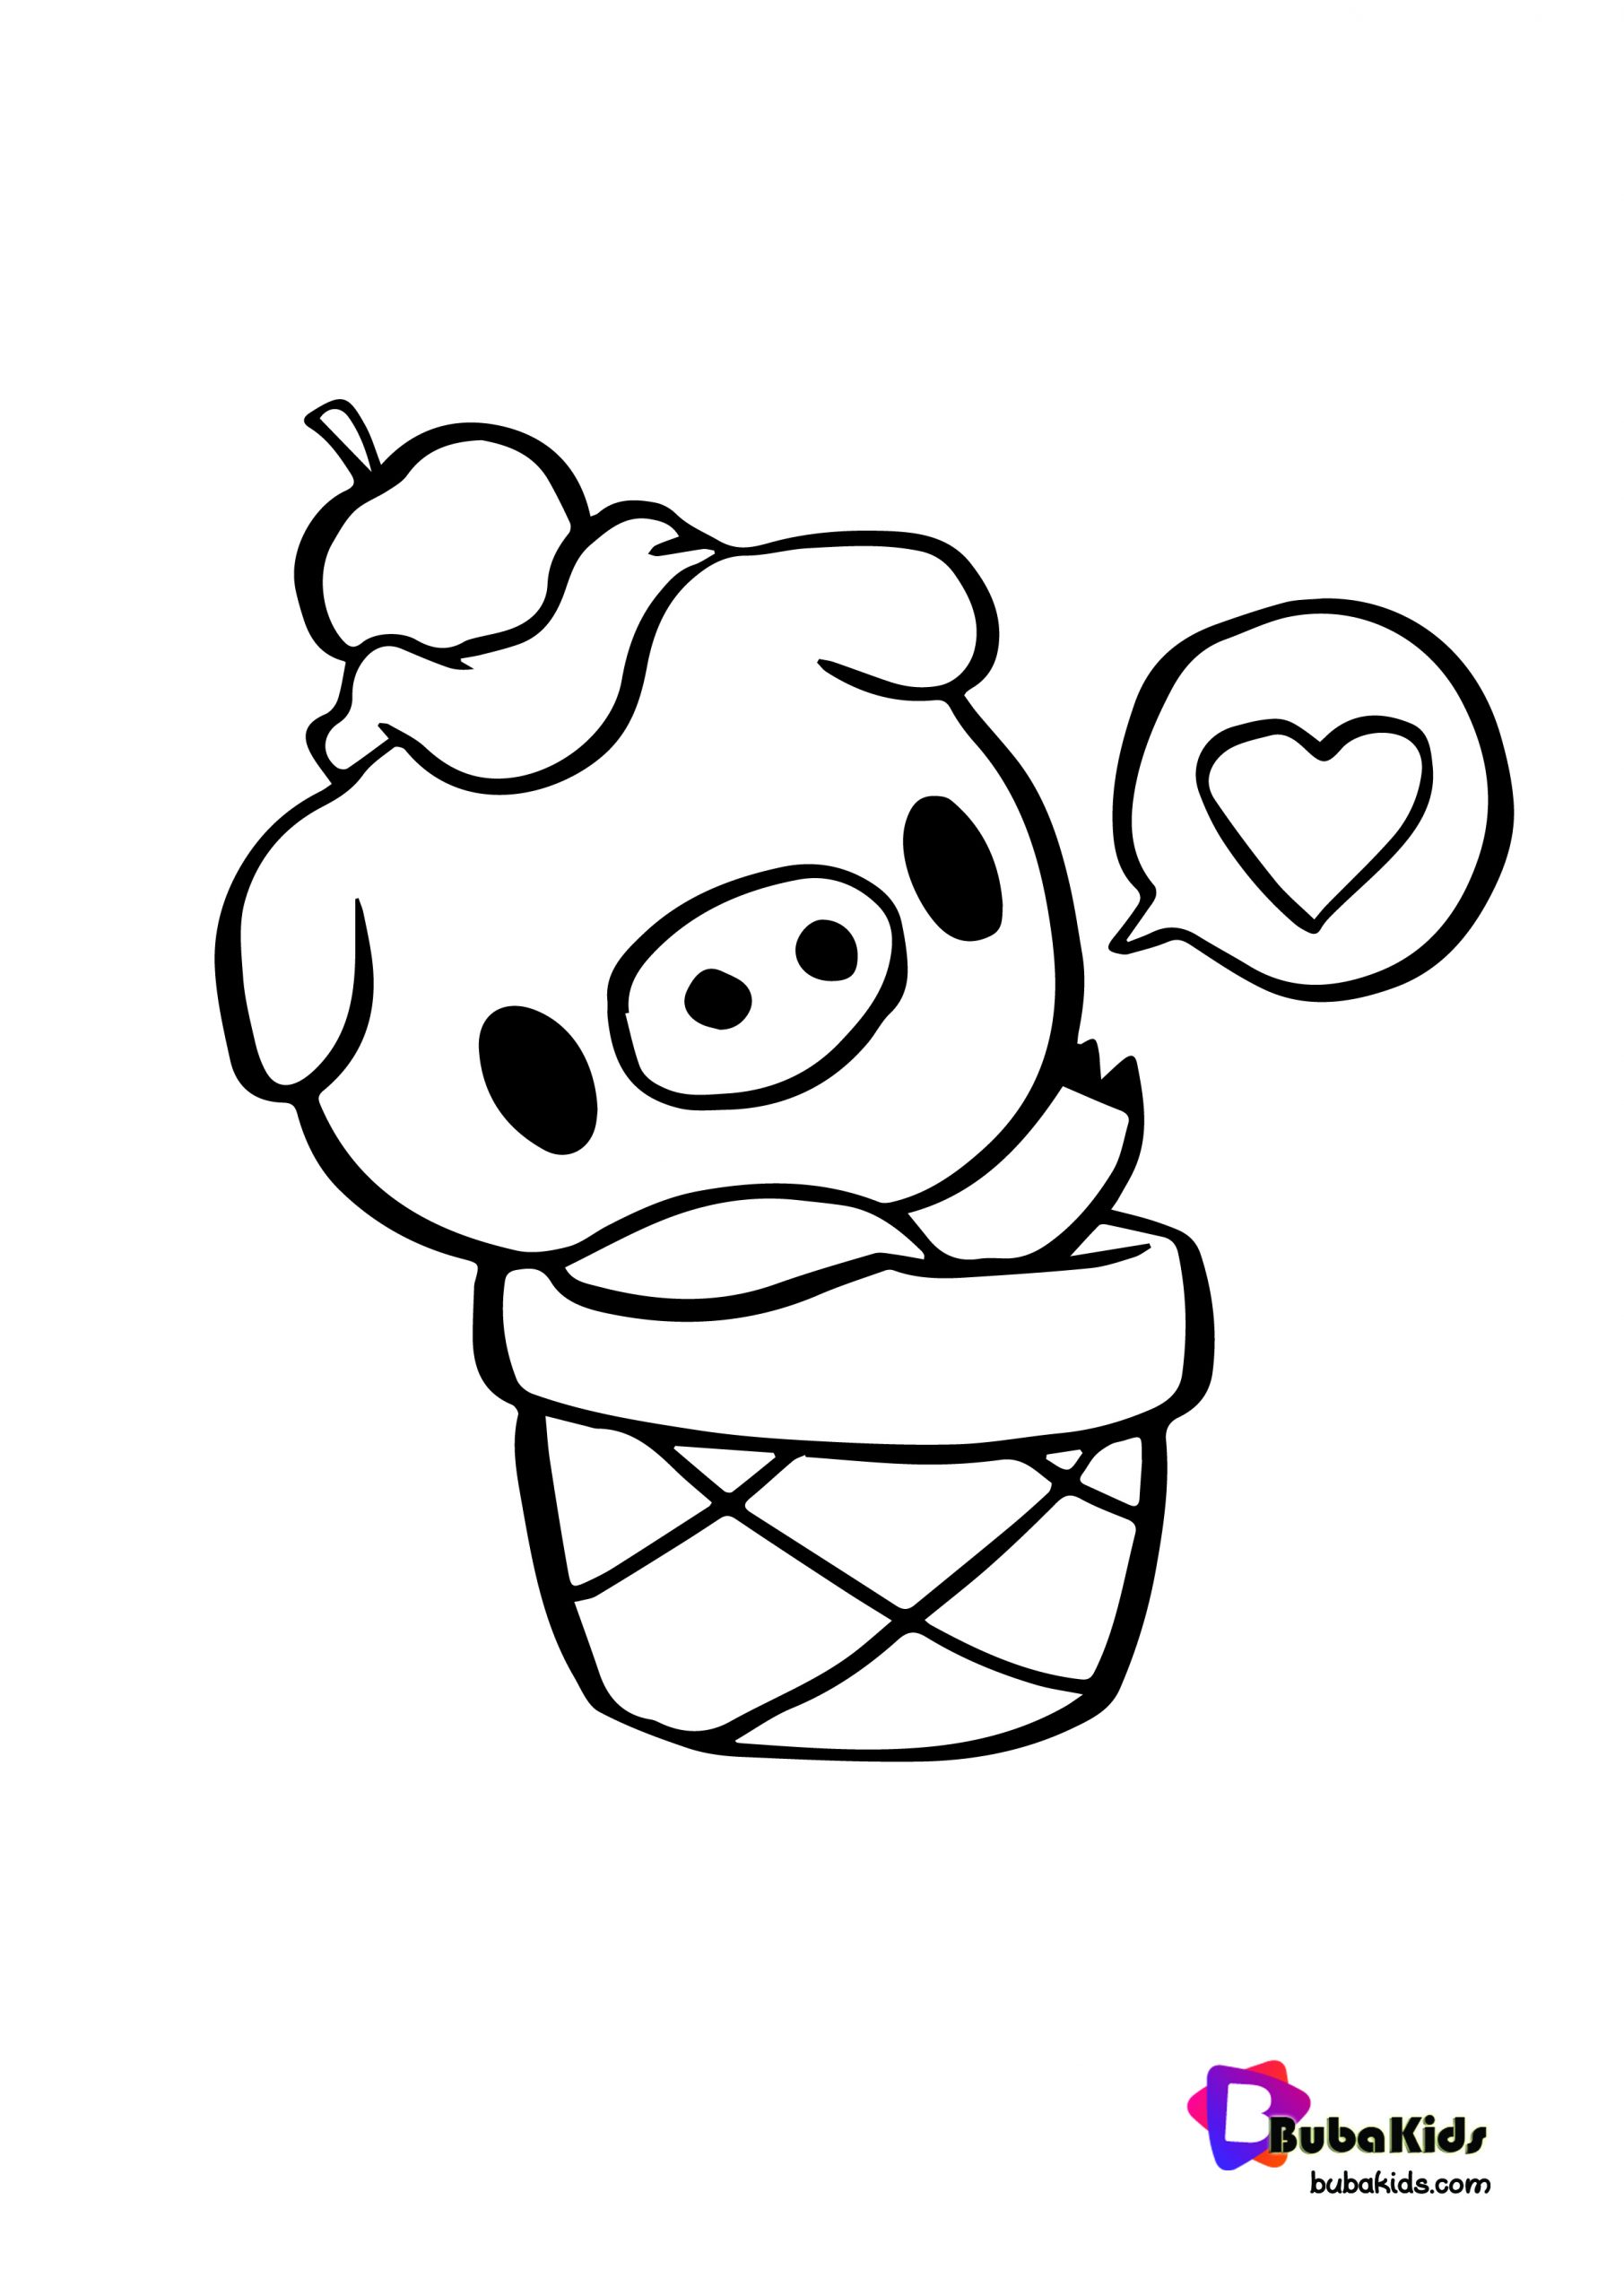 Cute Pigo The Pig Coloring Page BubaKids